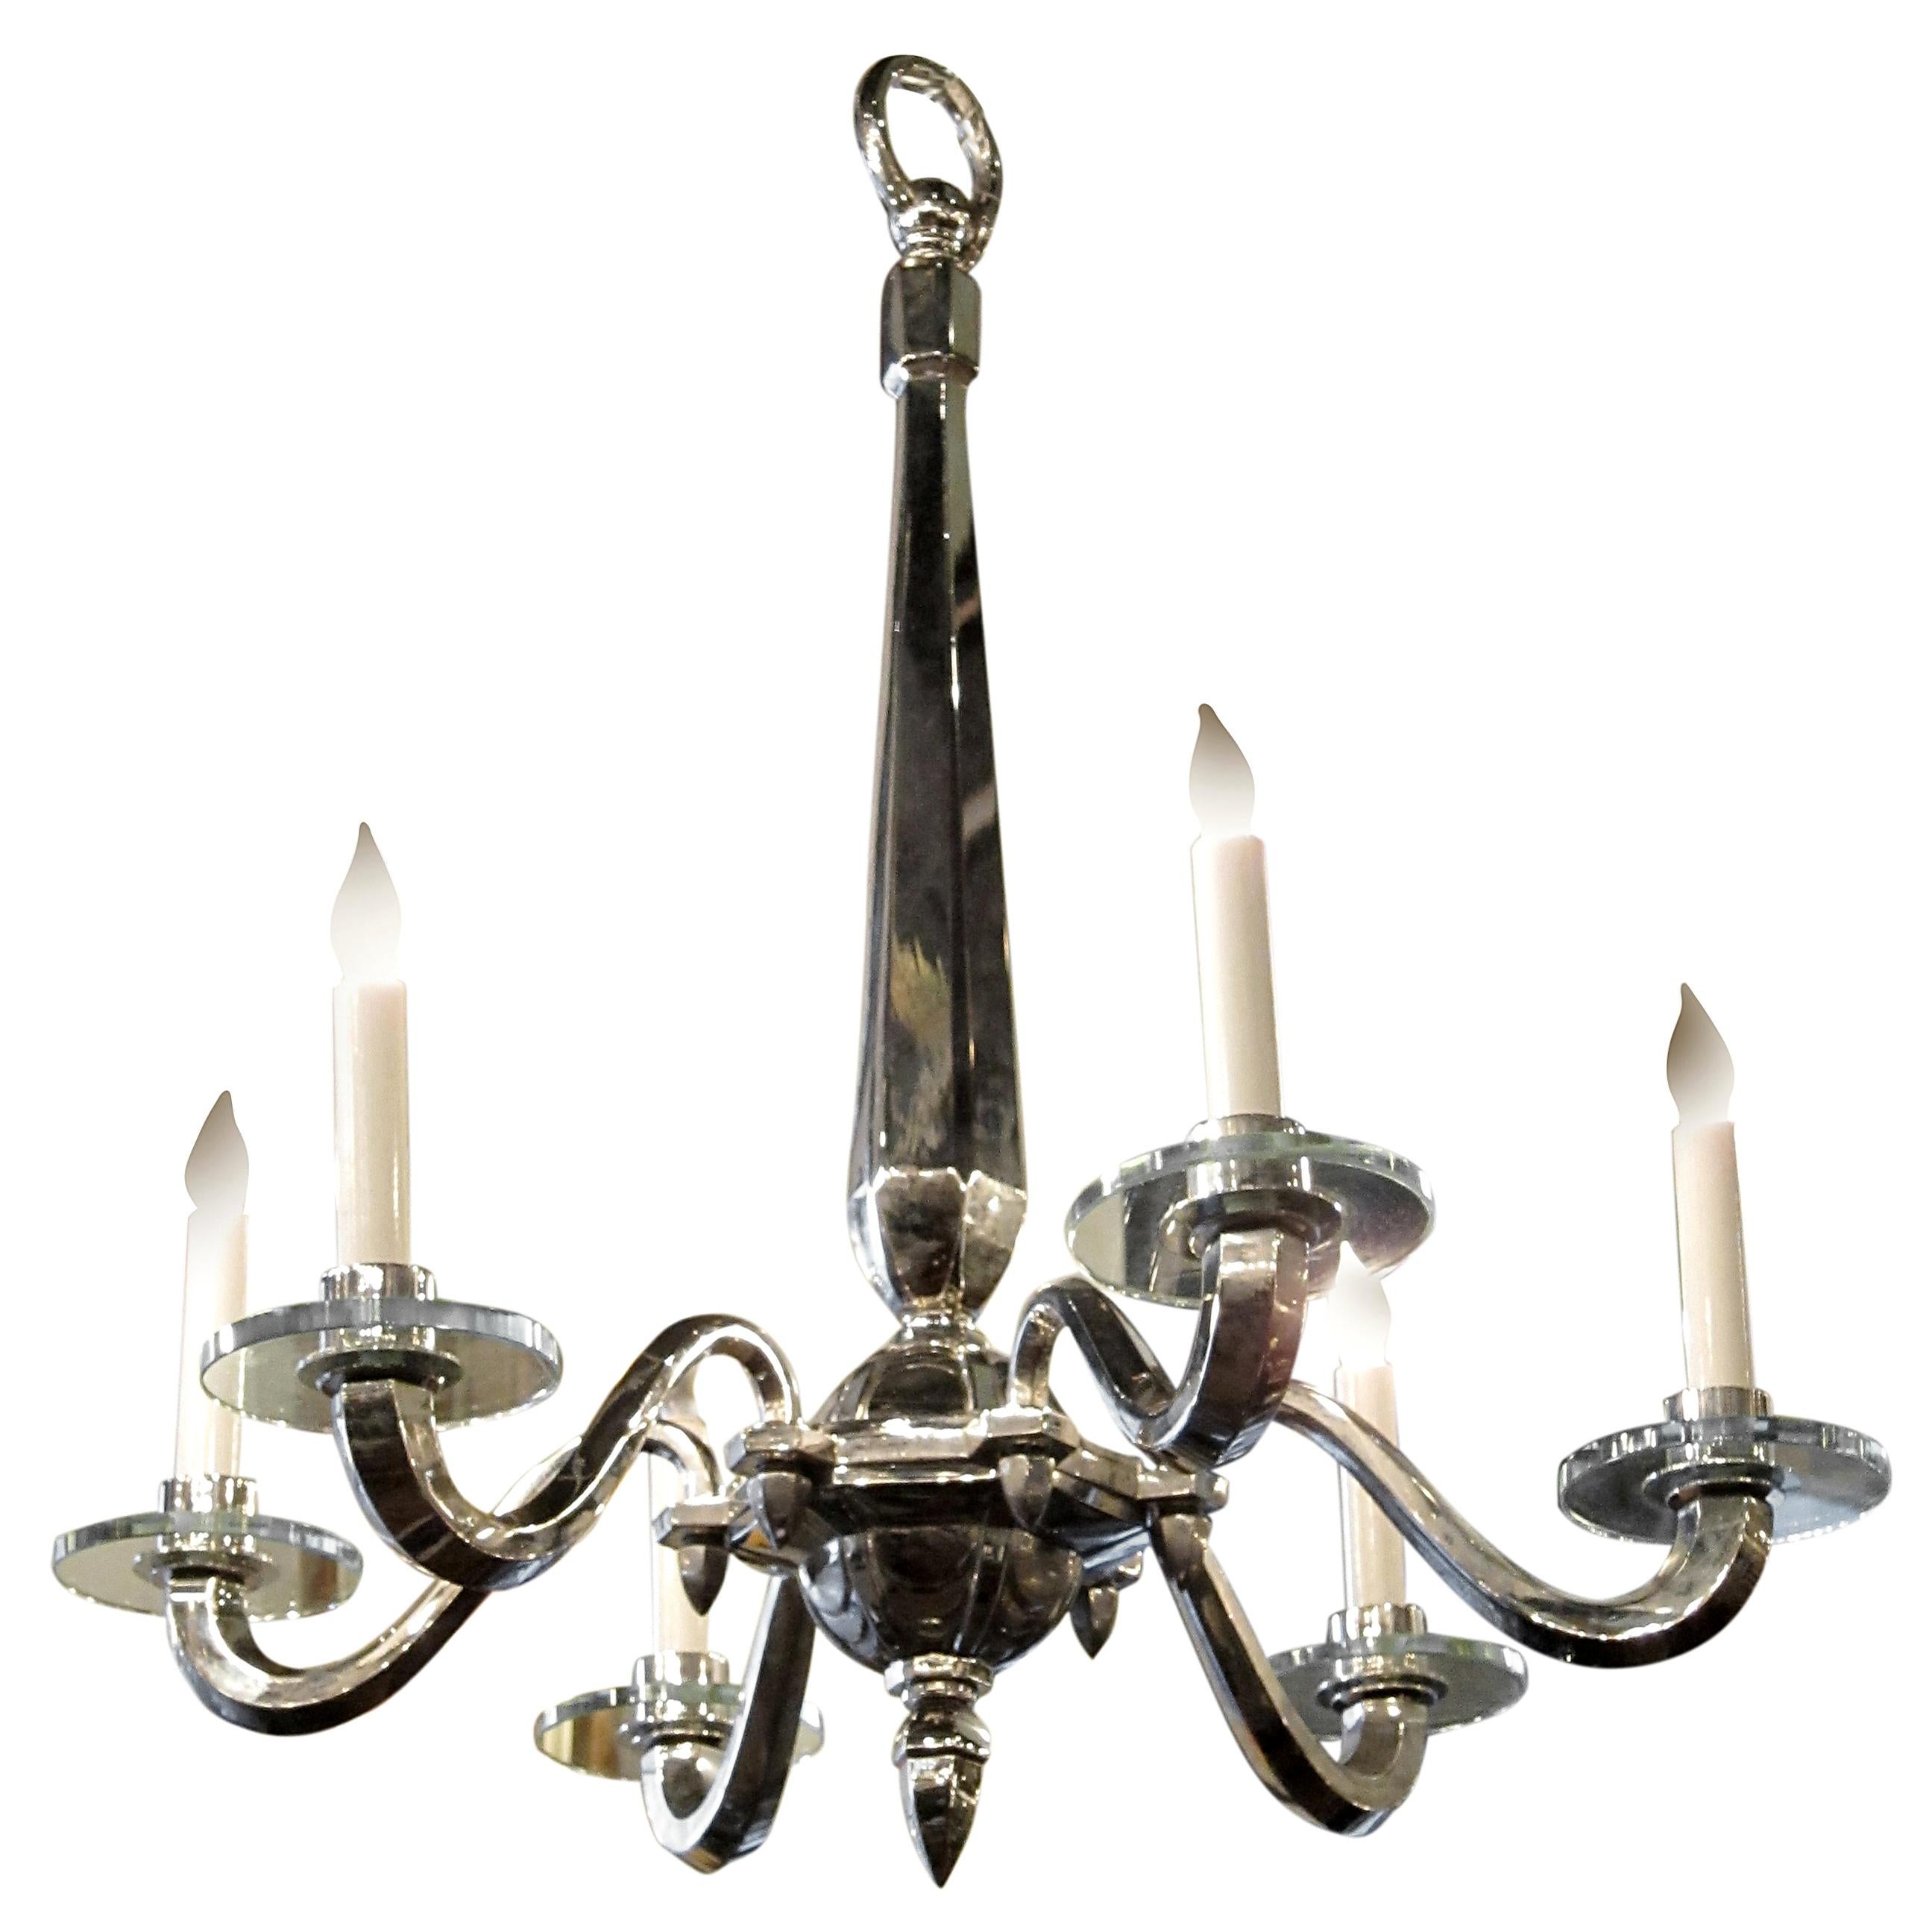 2000s French Art Deco 6 Arm Nickeled Bronze Chandelier For Sale